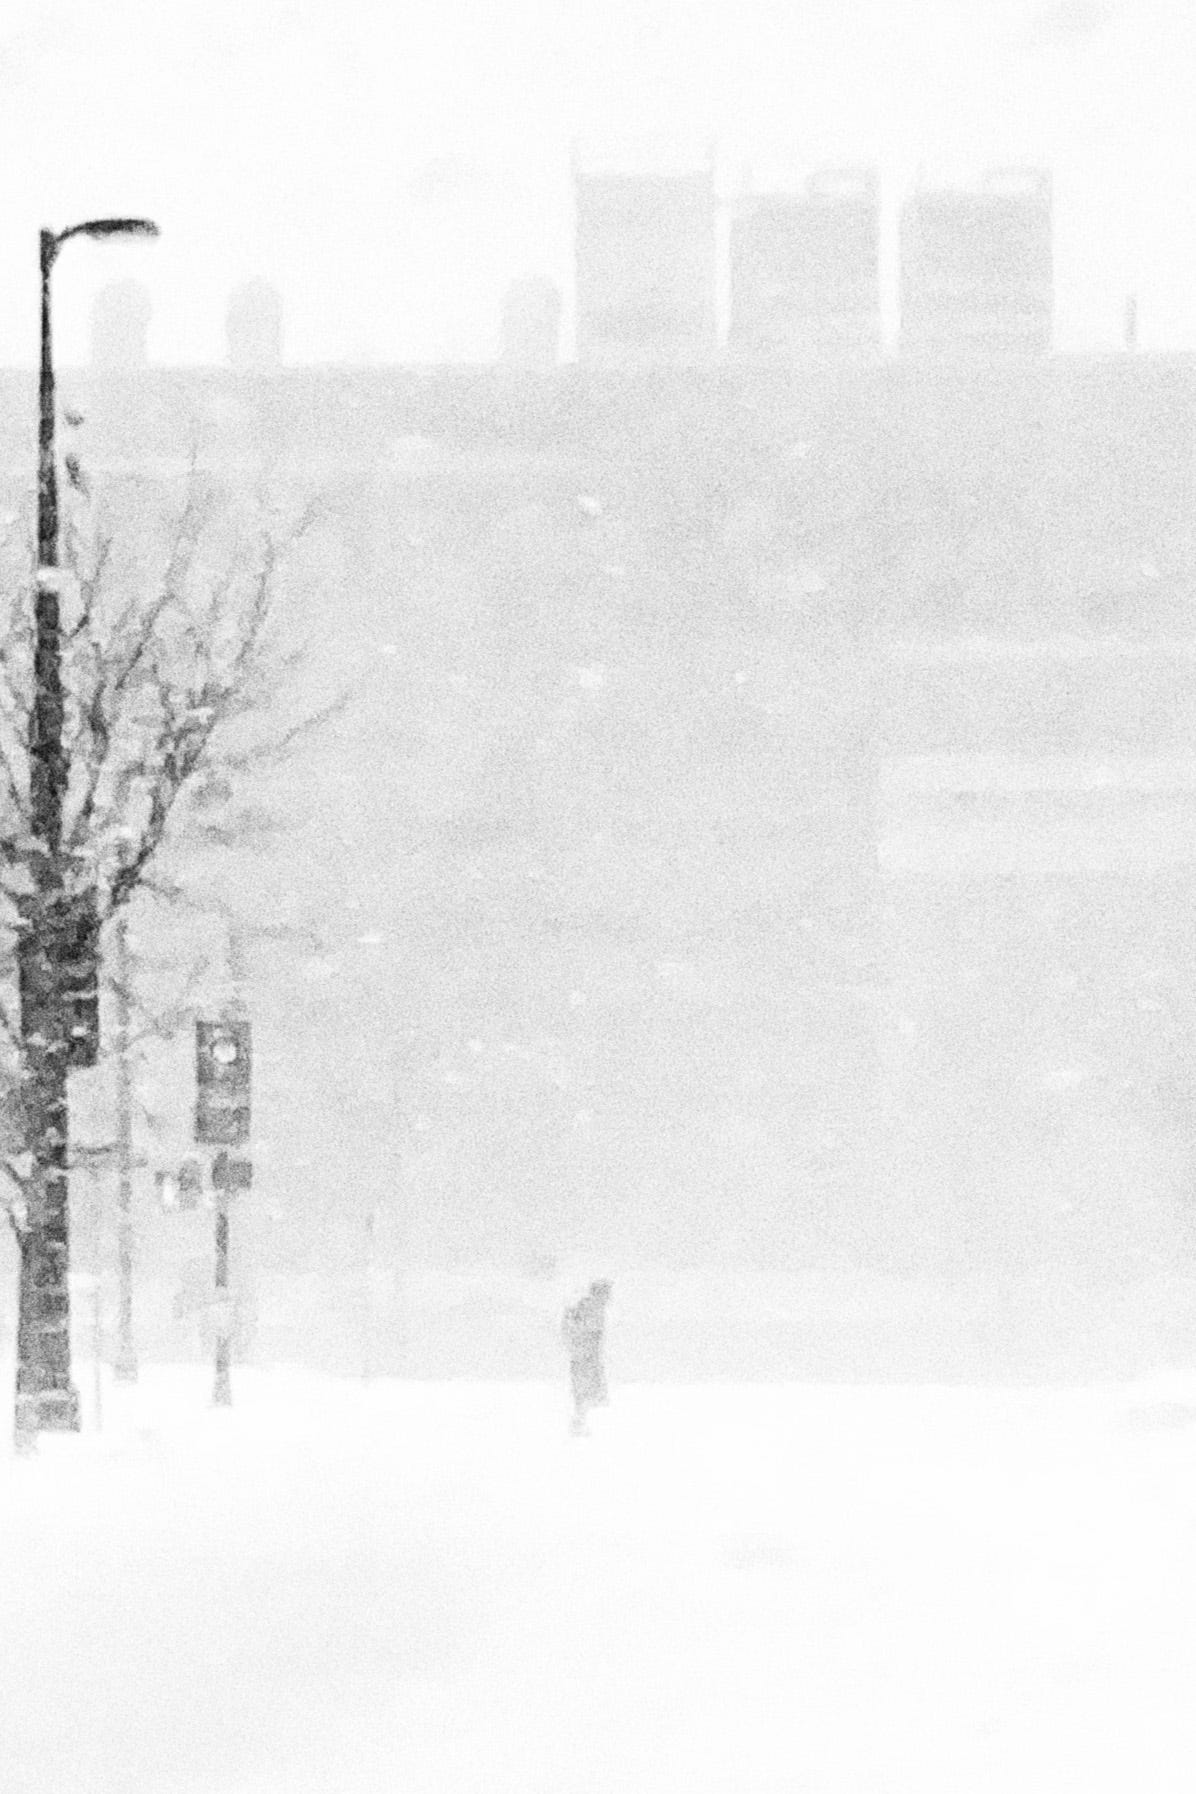 A person in the distance crosses the street in blizzard conditions.